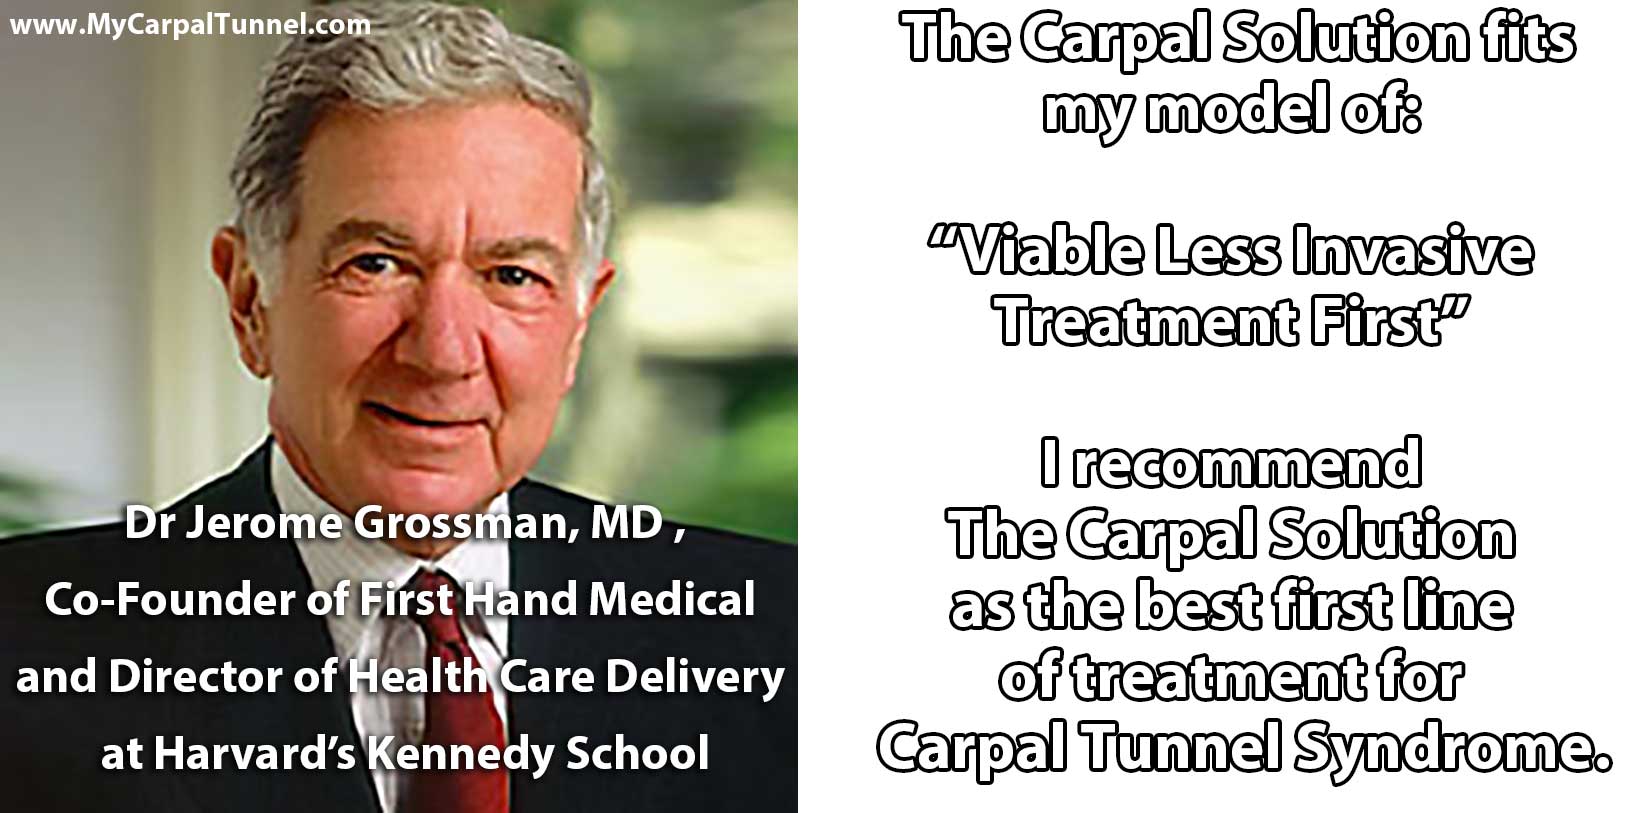 I recommend the carpal solution as the best first line of treatment for carpal tunnel syndrome